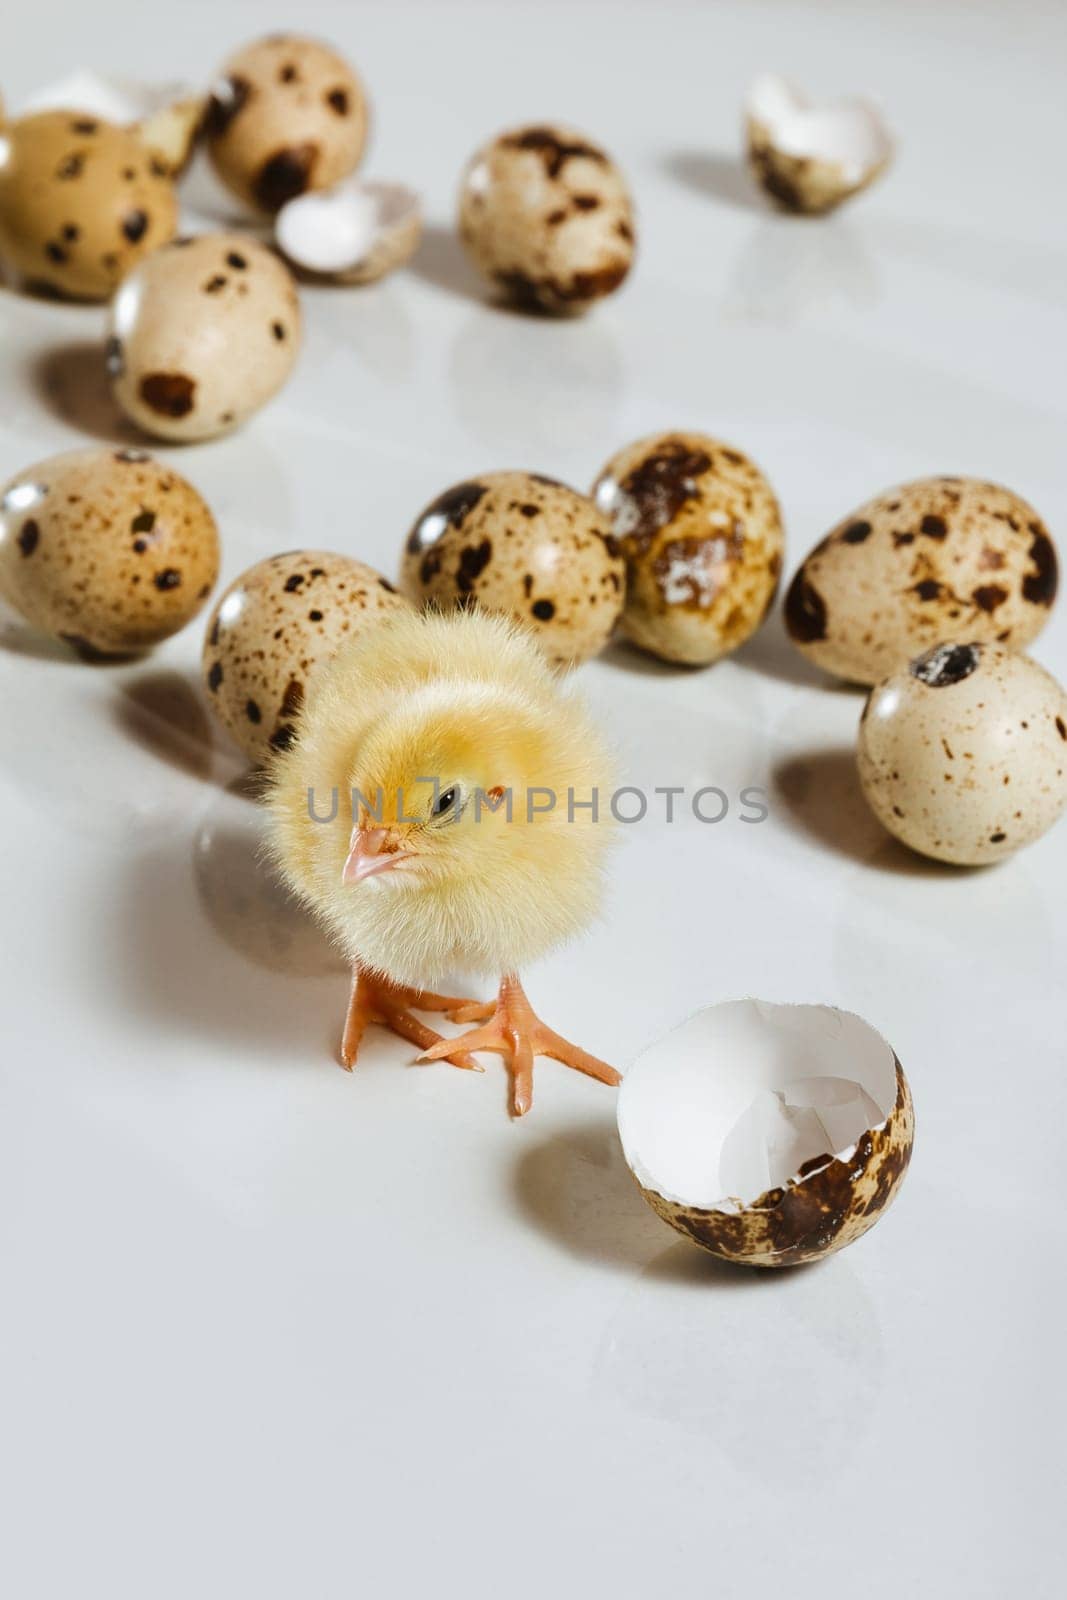 A quail chicken squints among the quail eggs. Poultry farming in incubators